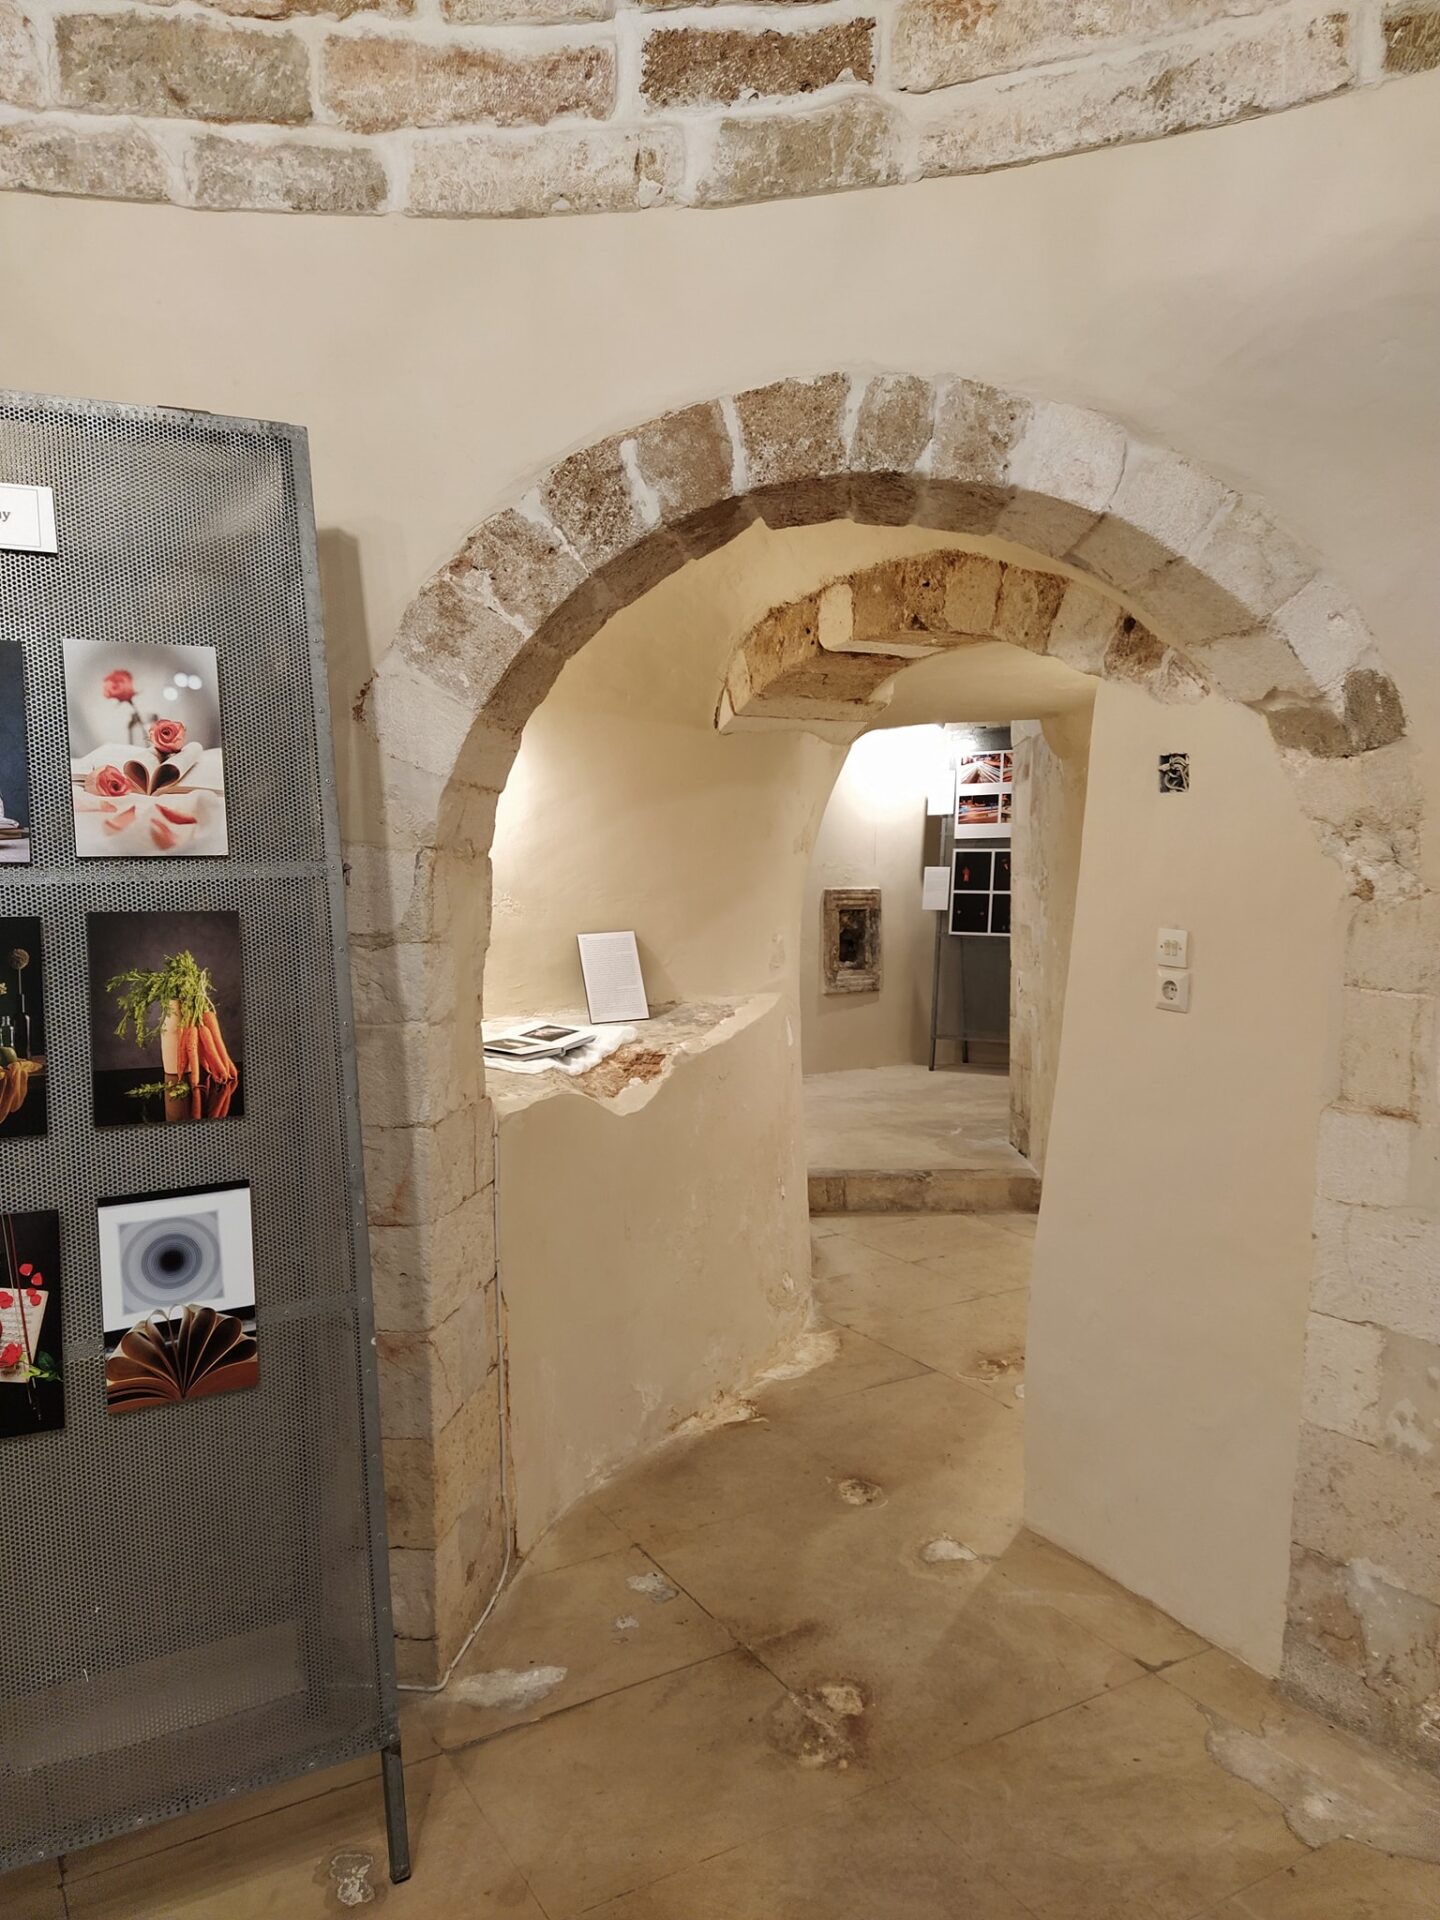 Insights Greece - Old Hammam in Chania Becomes an Art Gallery 